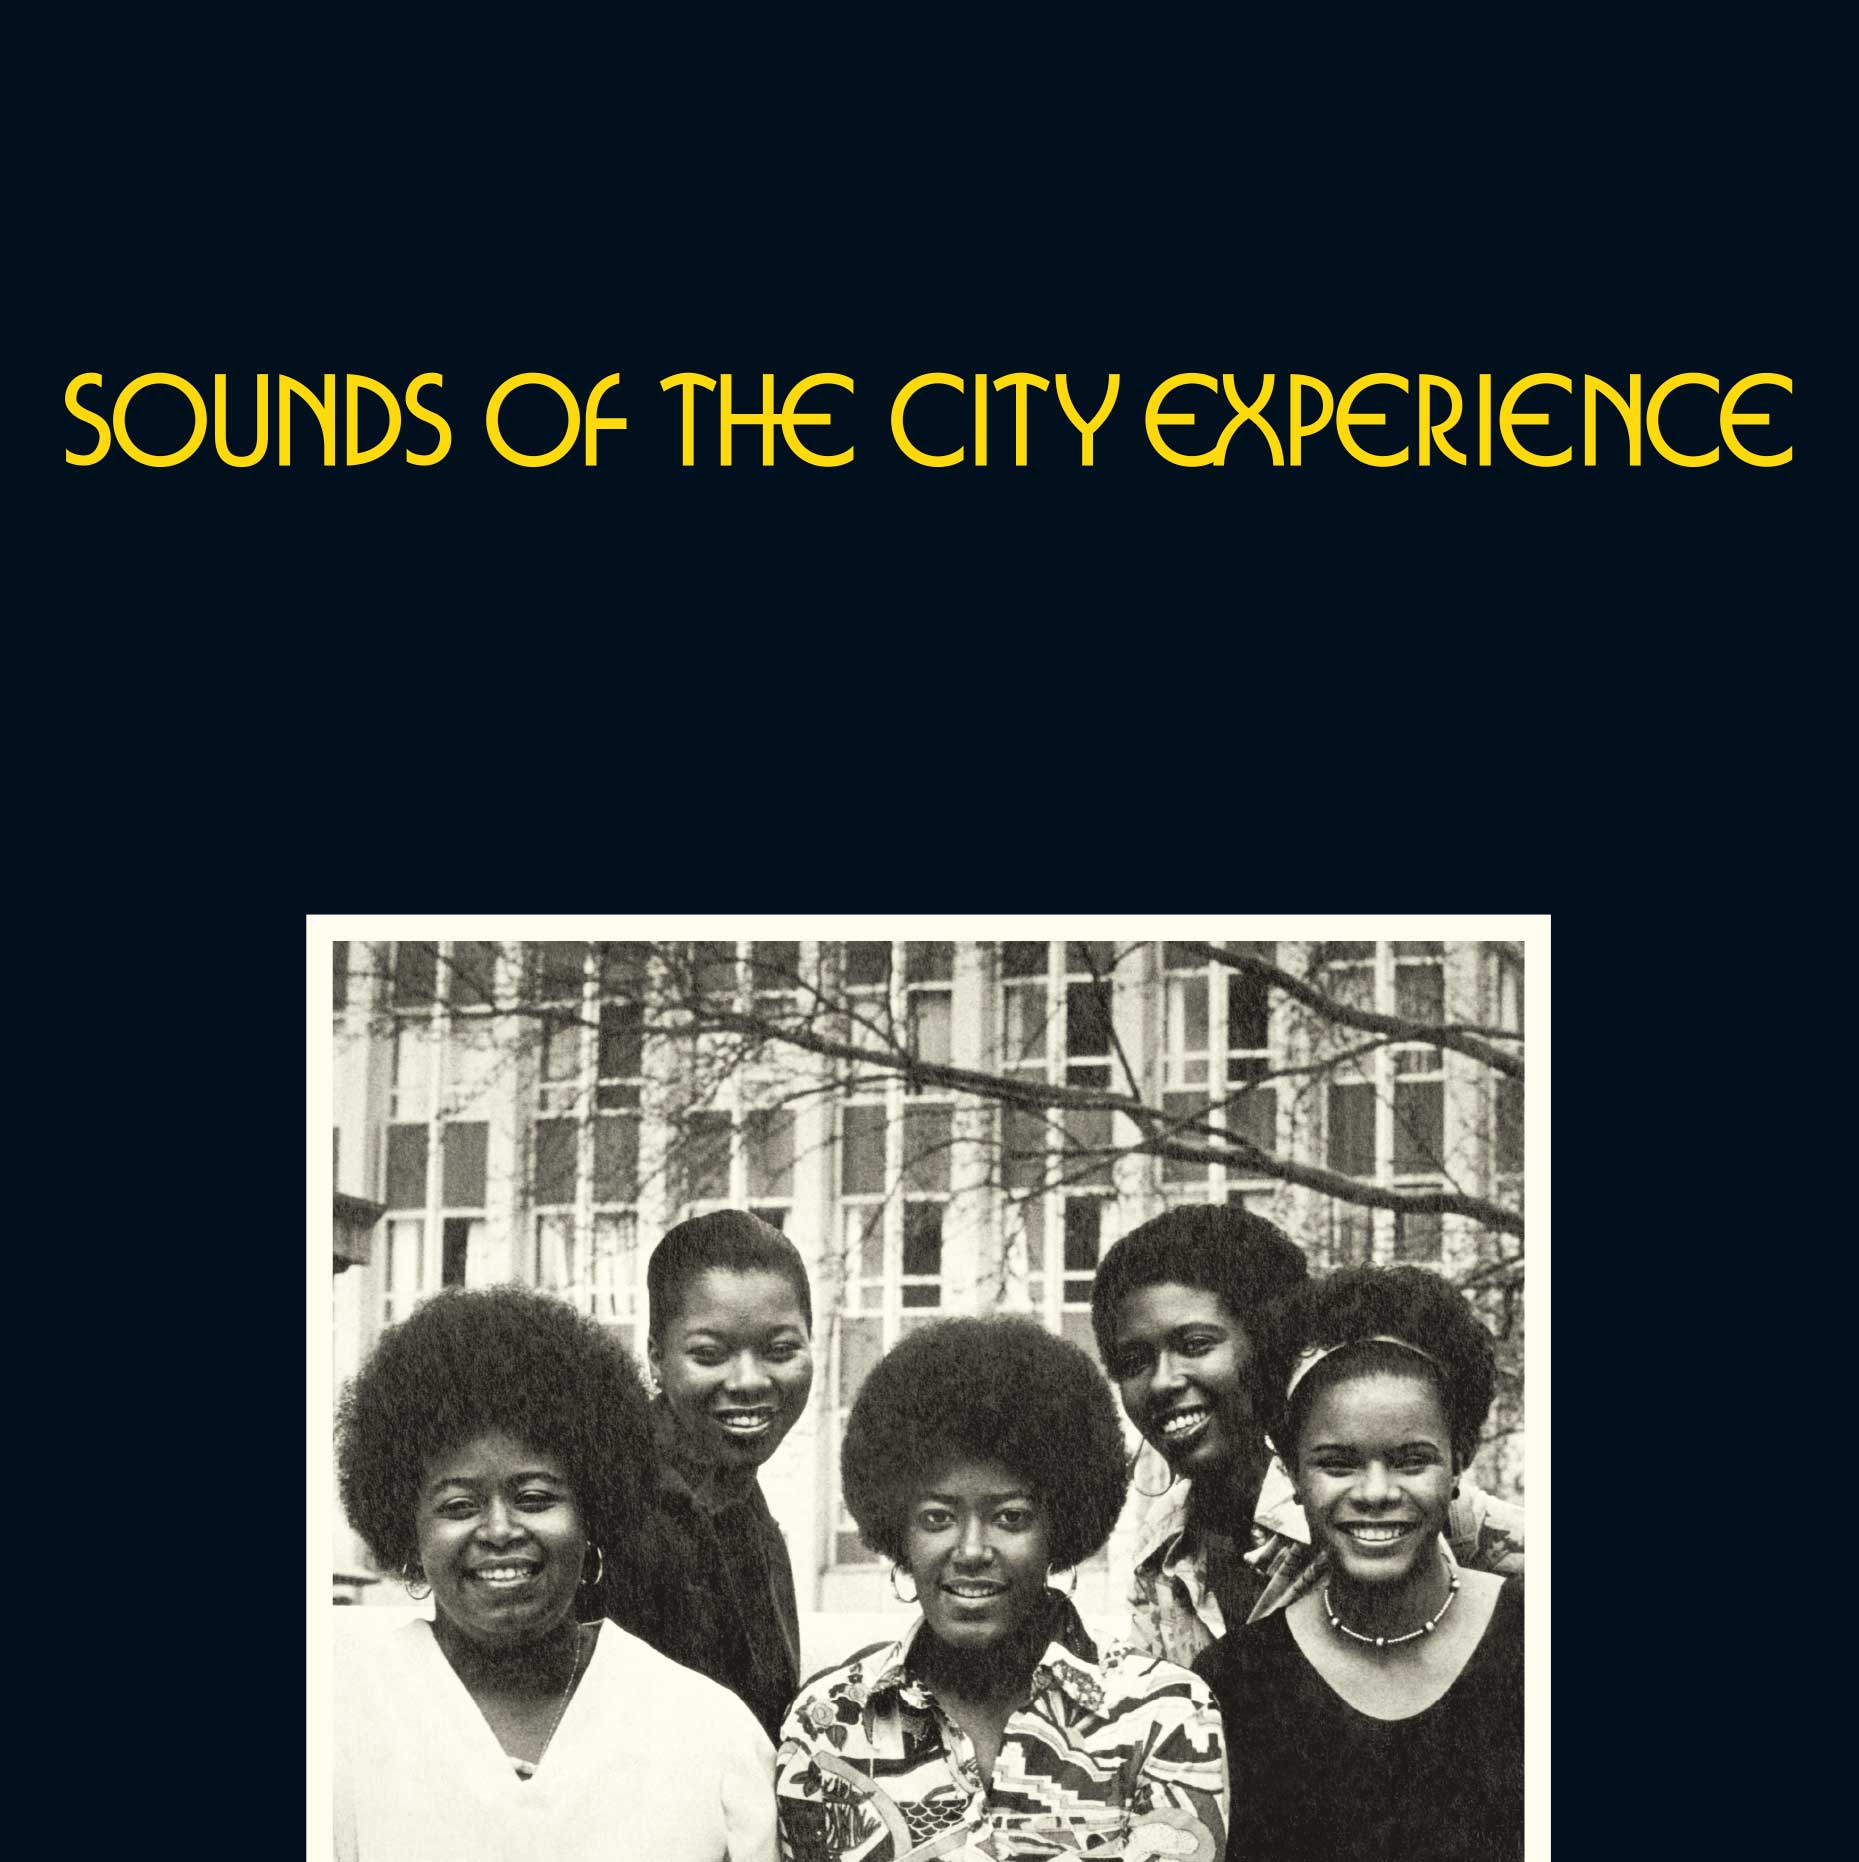 SOUNDS OF THE CITY EXPERIENCE